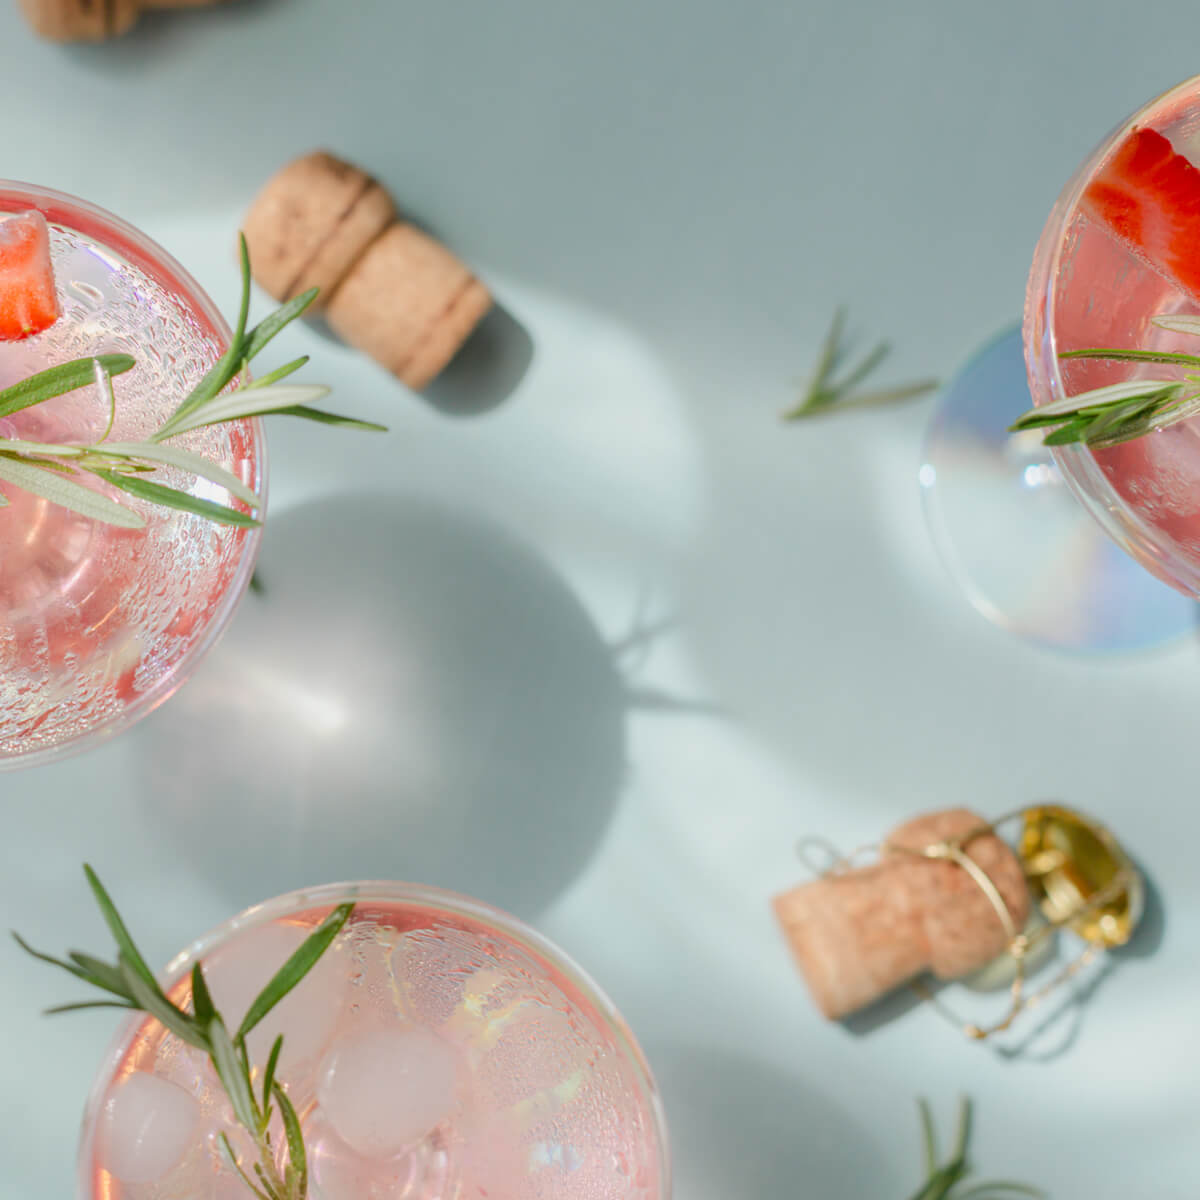 Summer Fling champagne cocktail by Goodwill Wine - Shutterstock